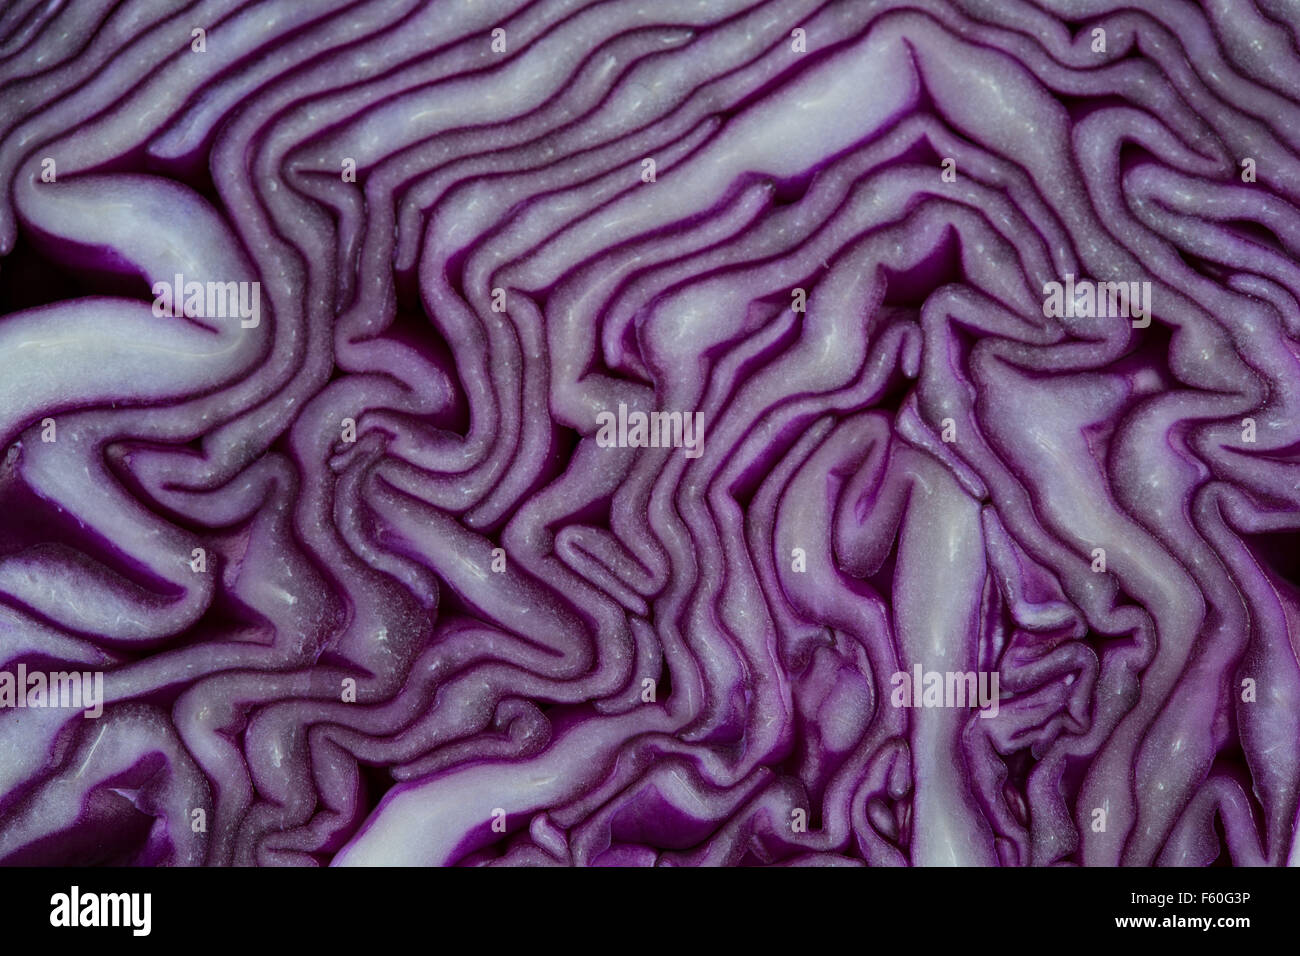 A close up / macro of a sliced red cabbage Stock Photo